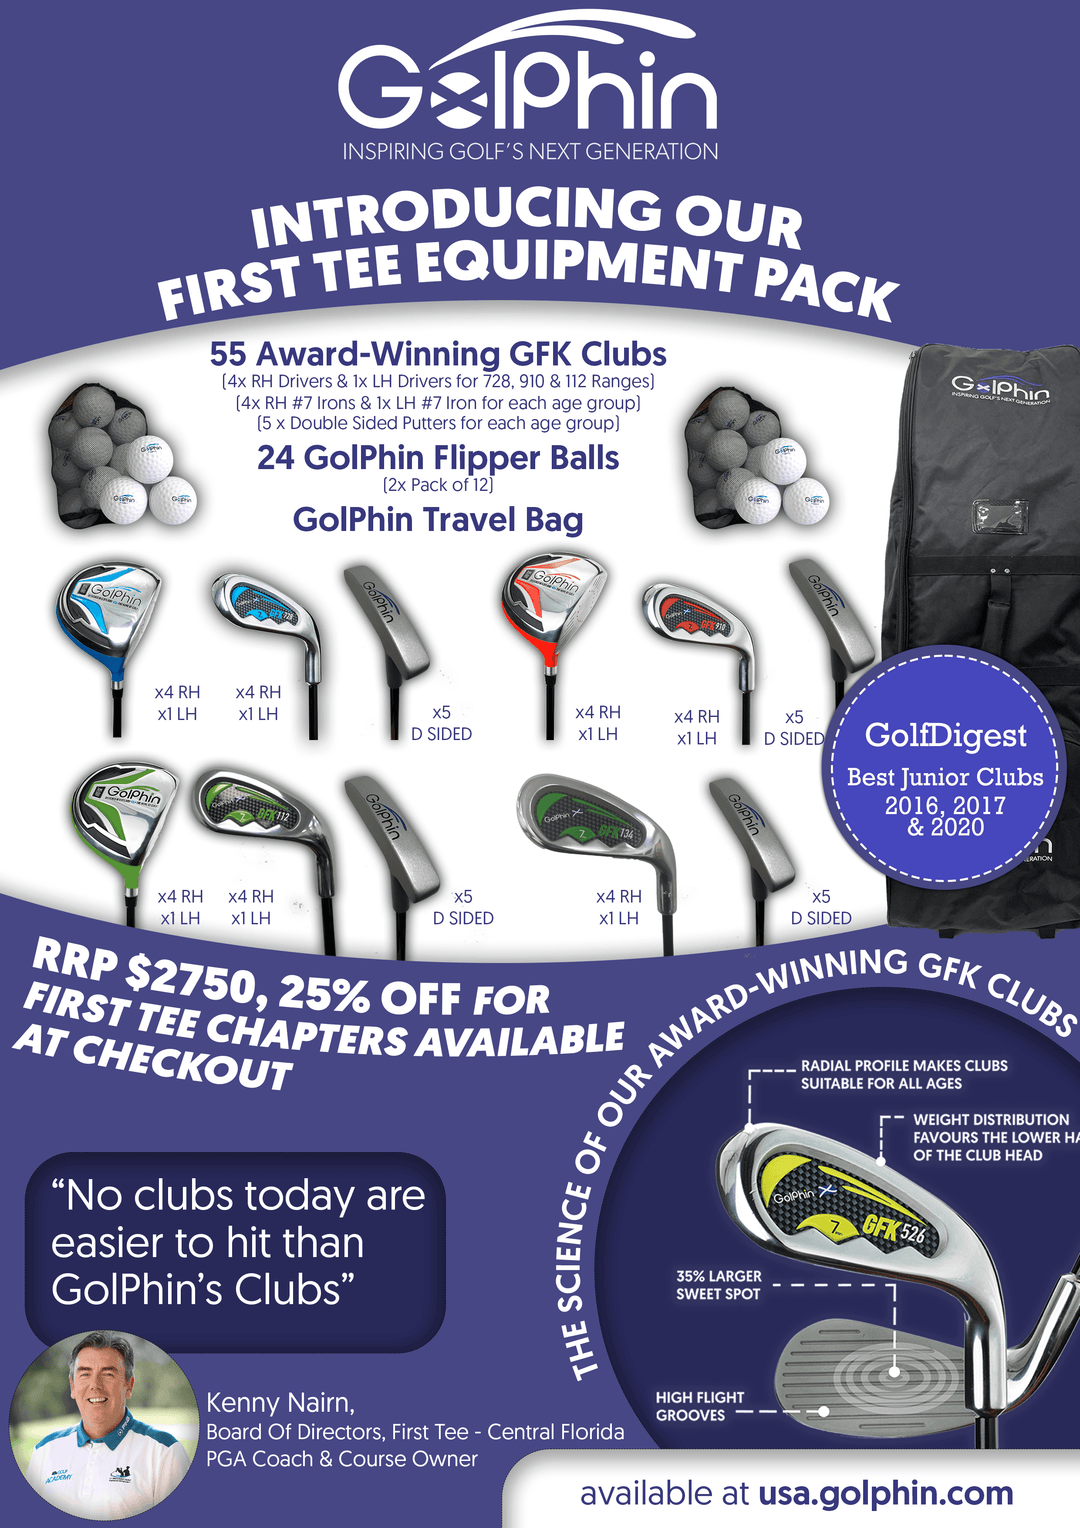 FIRST TEE EQUIPMENT PACK